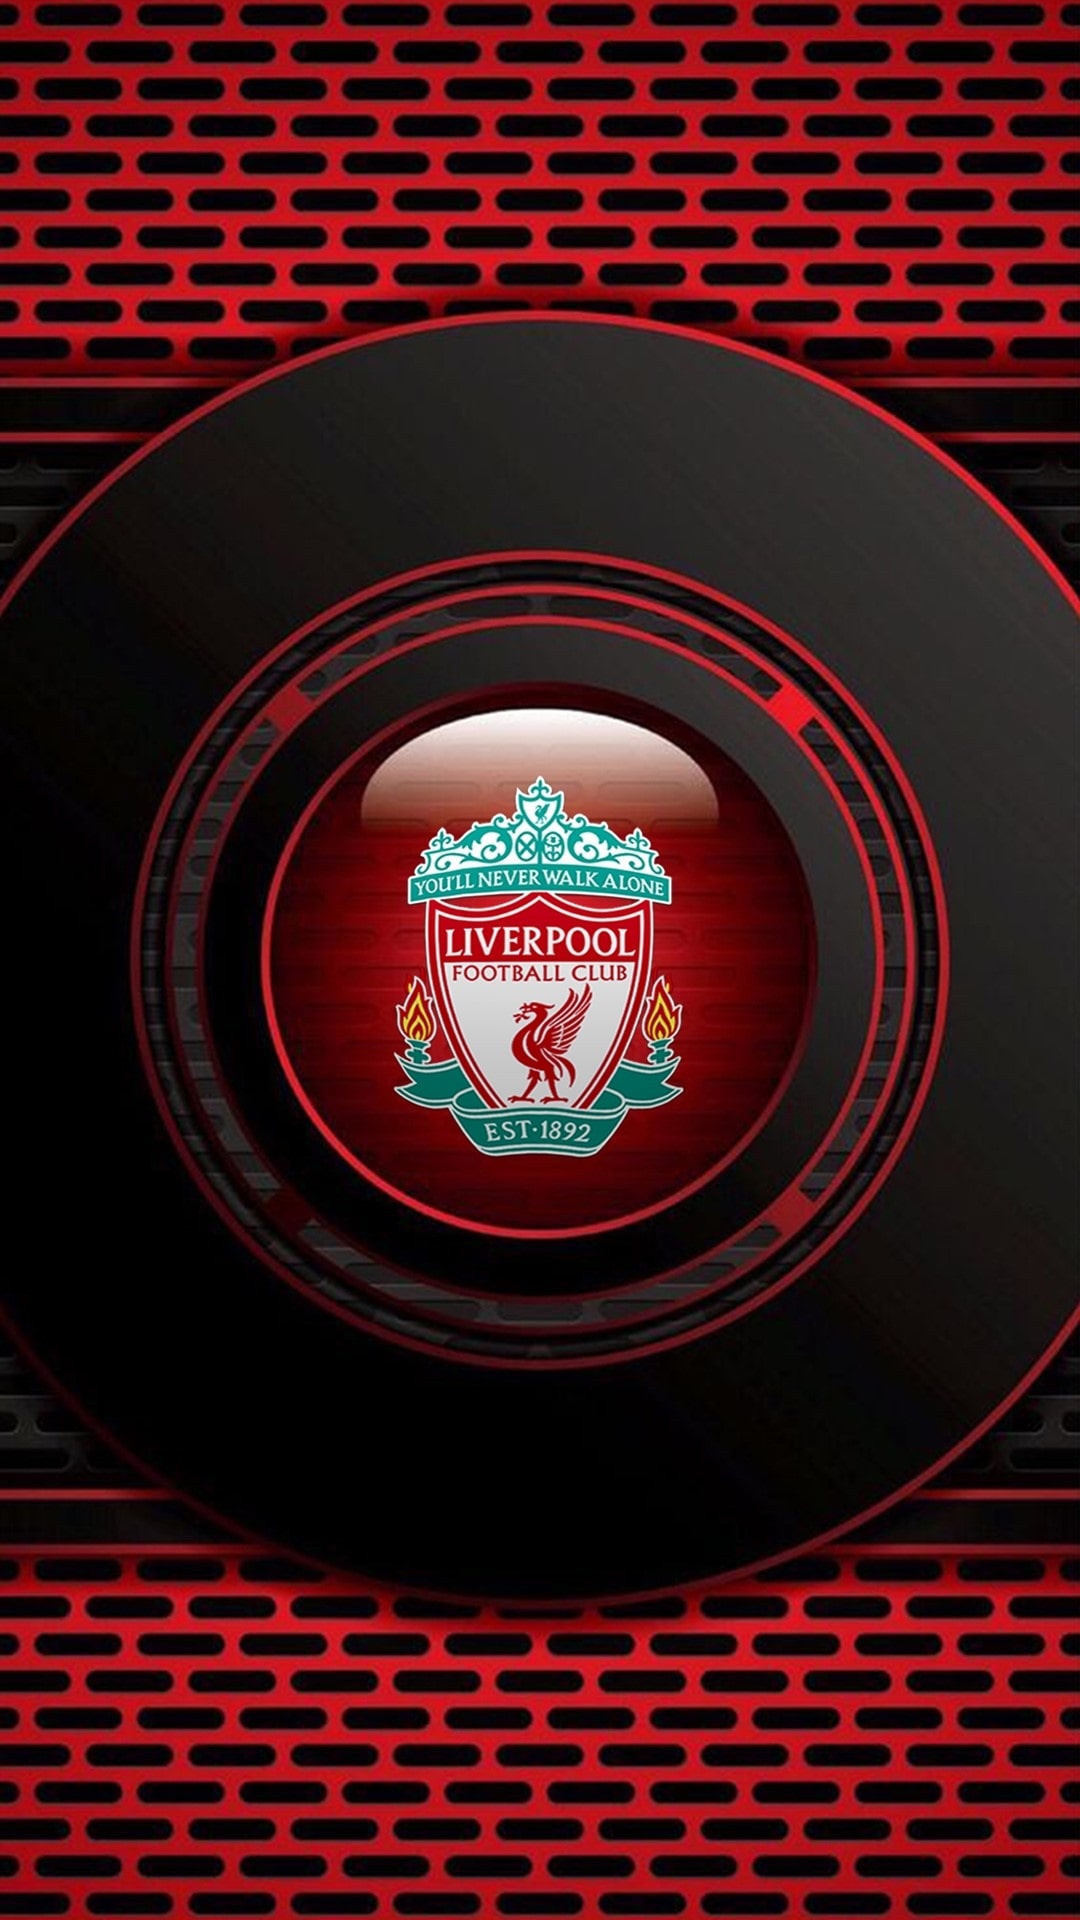 Liverpool Football Club: Recognized around the world as one of an elite group of clubs with a truly global reputation. 1080x1920 Full HD Wallpaper.